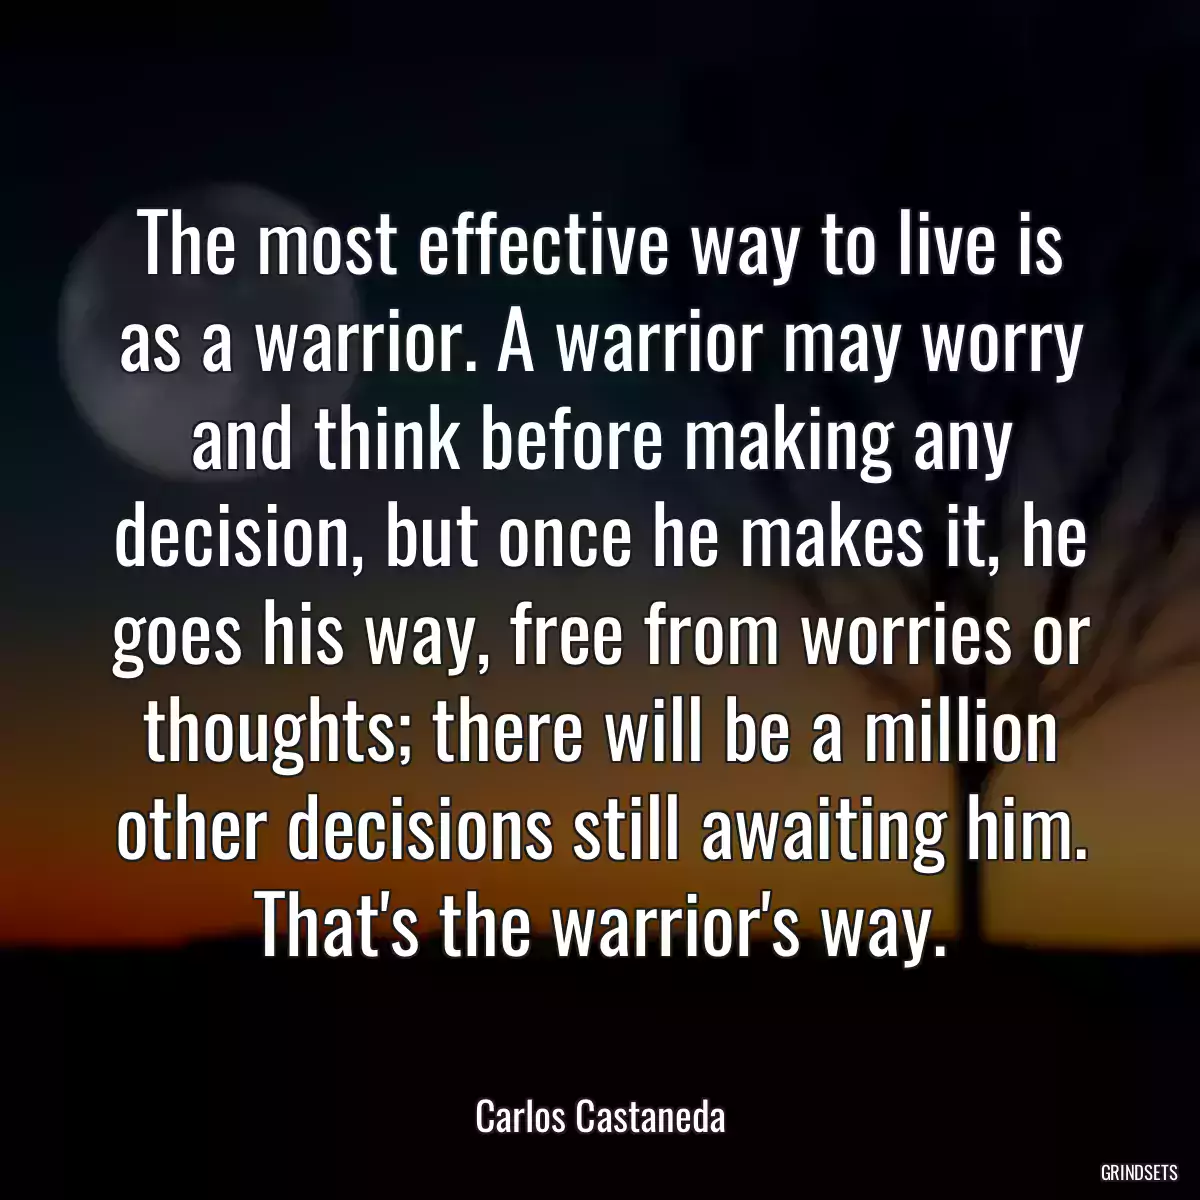 The most effective way to live is as a warrior. A warrior may worry and think before making any decision, but once he makes it, he goes his way, free from worries or thoughts; there will be a million other decisions still awaiting him. That\'s the warrior\'s way.